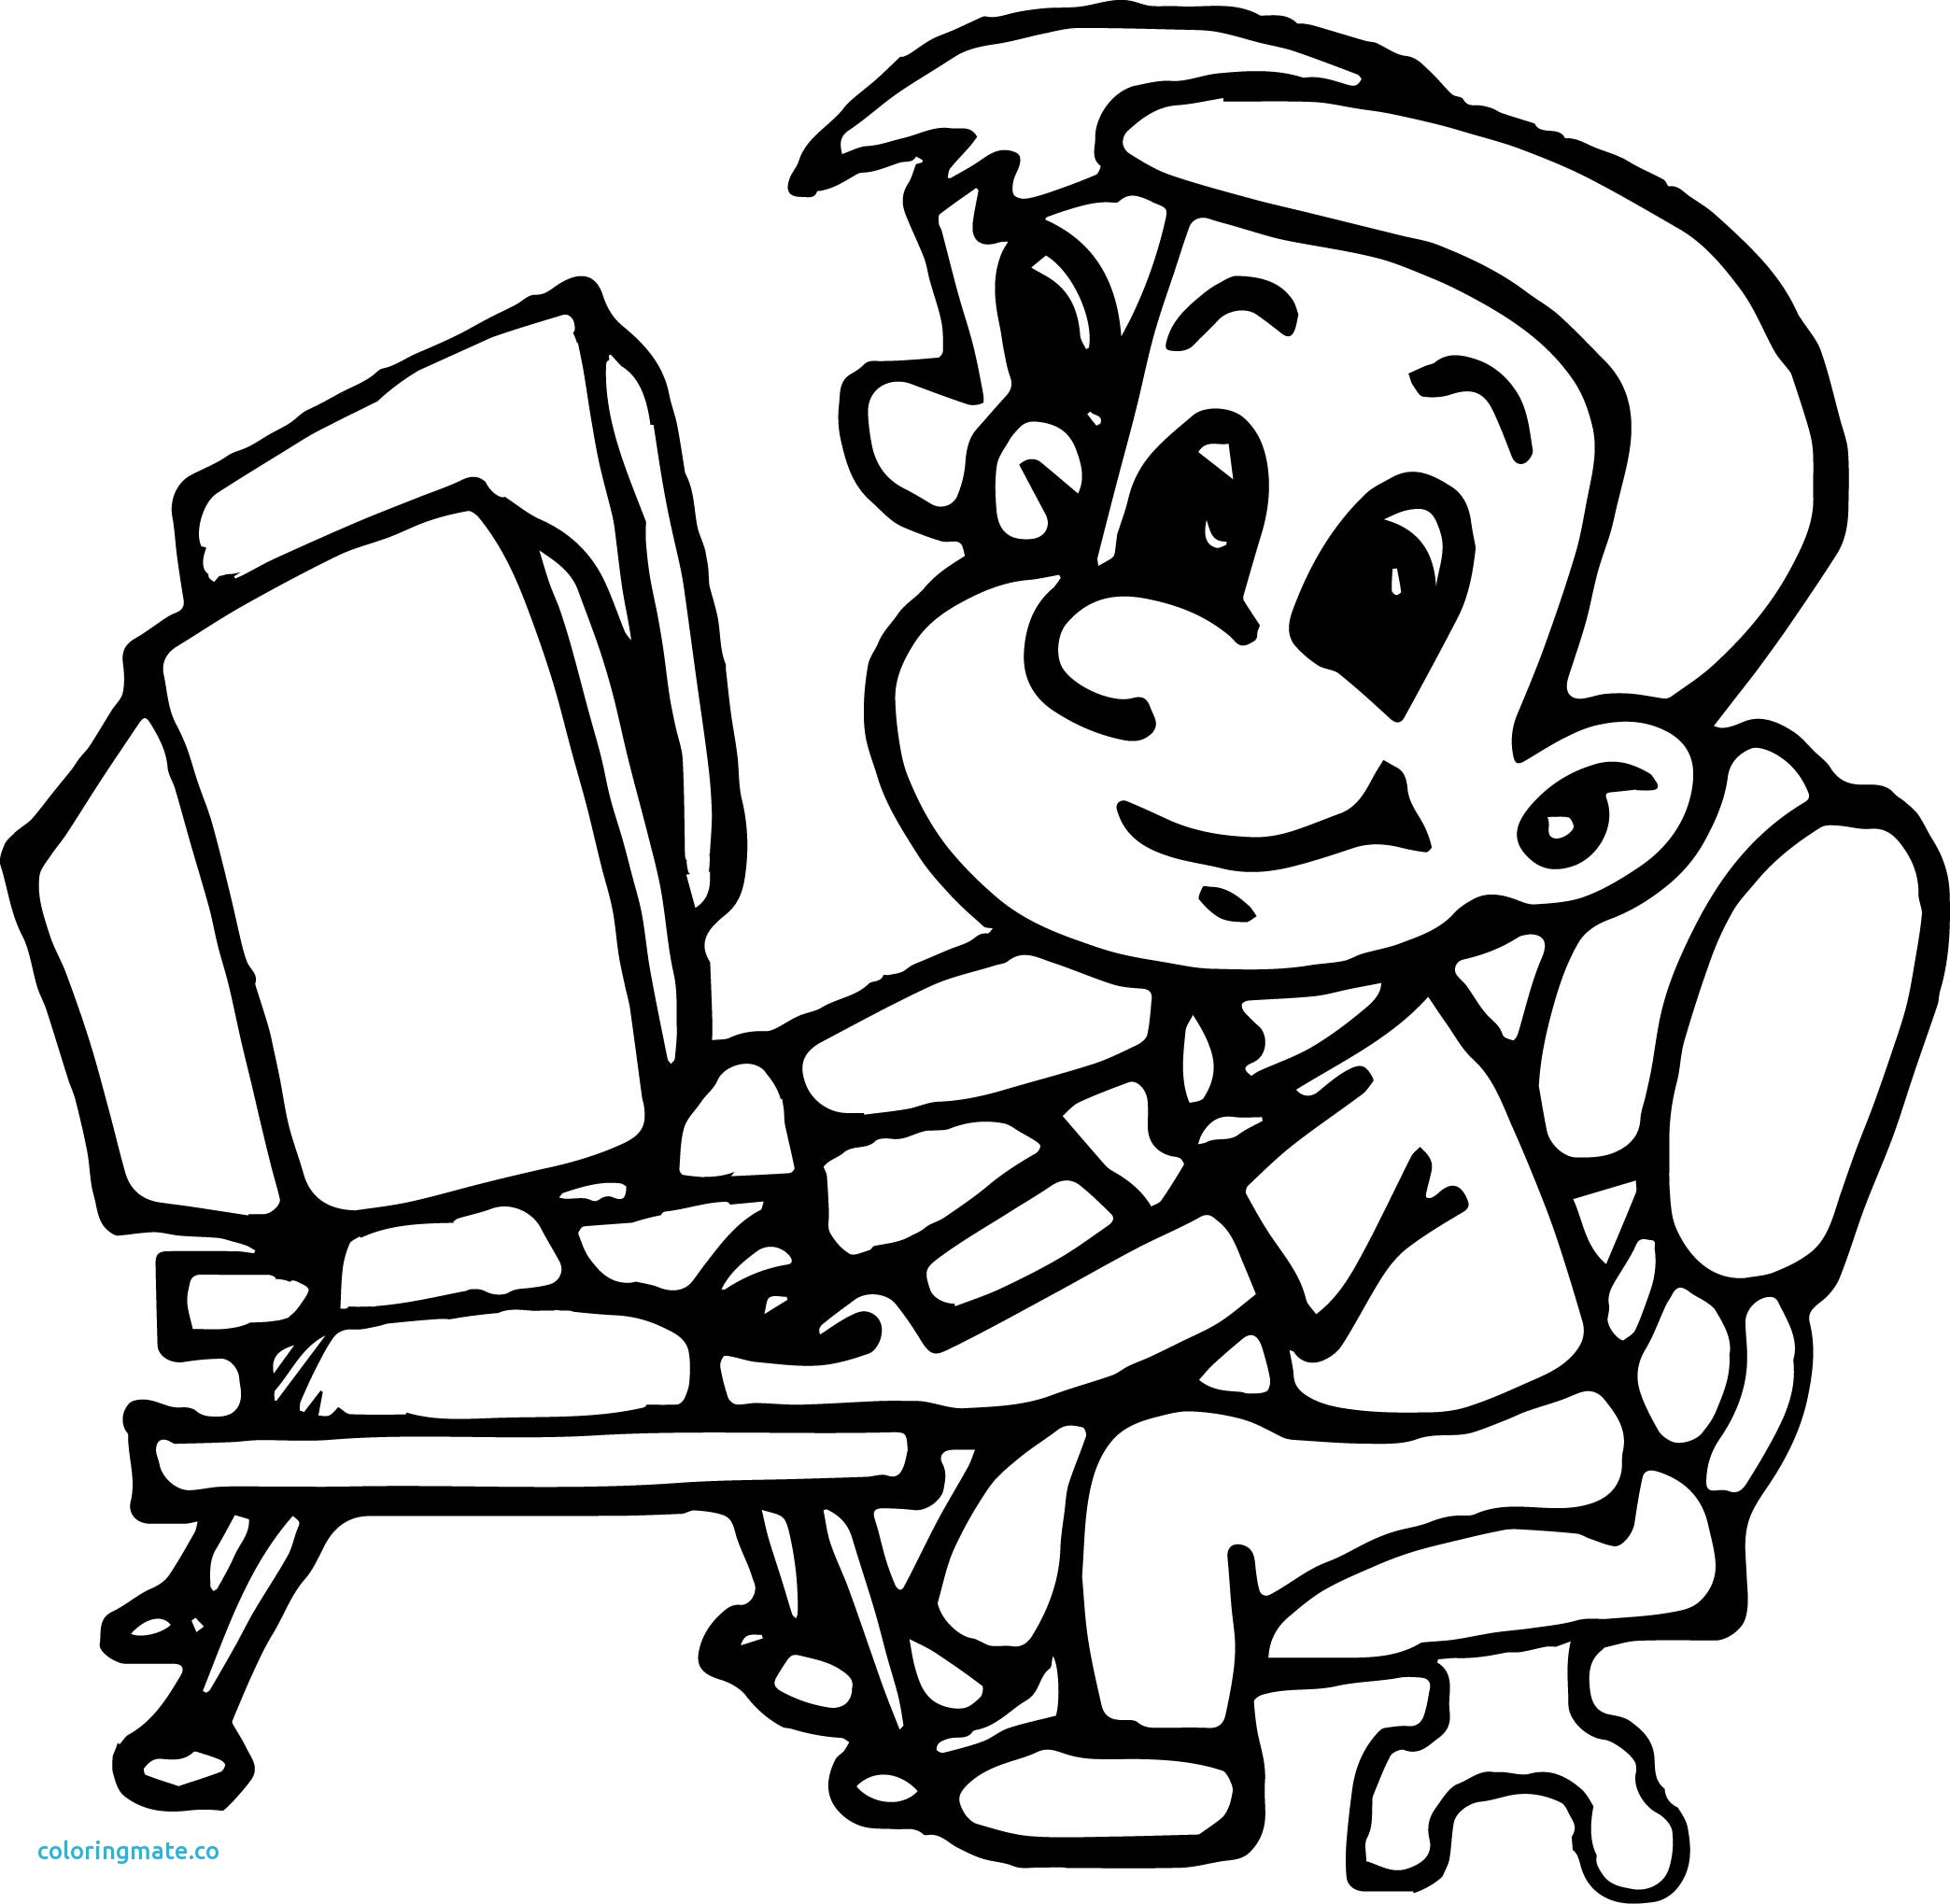 Computer Coloring Pages For Kids at GetColorings.com | Free printable